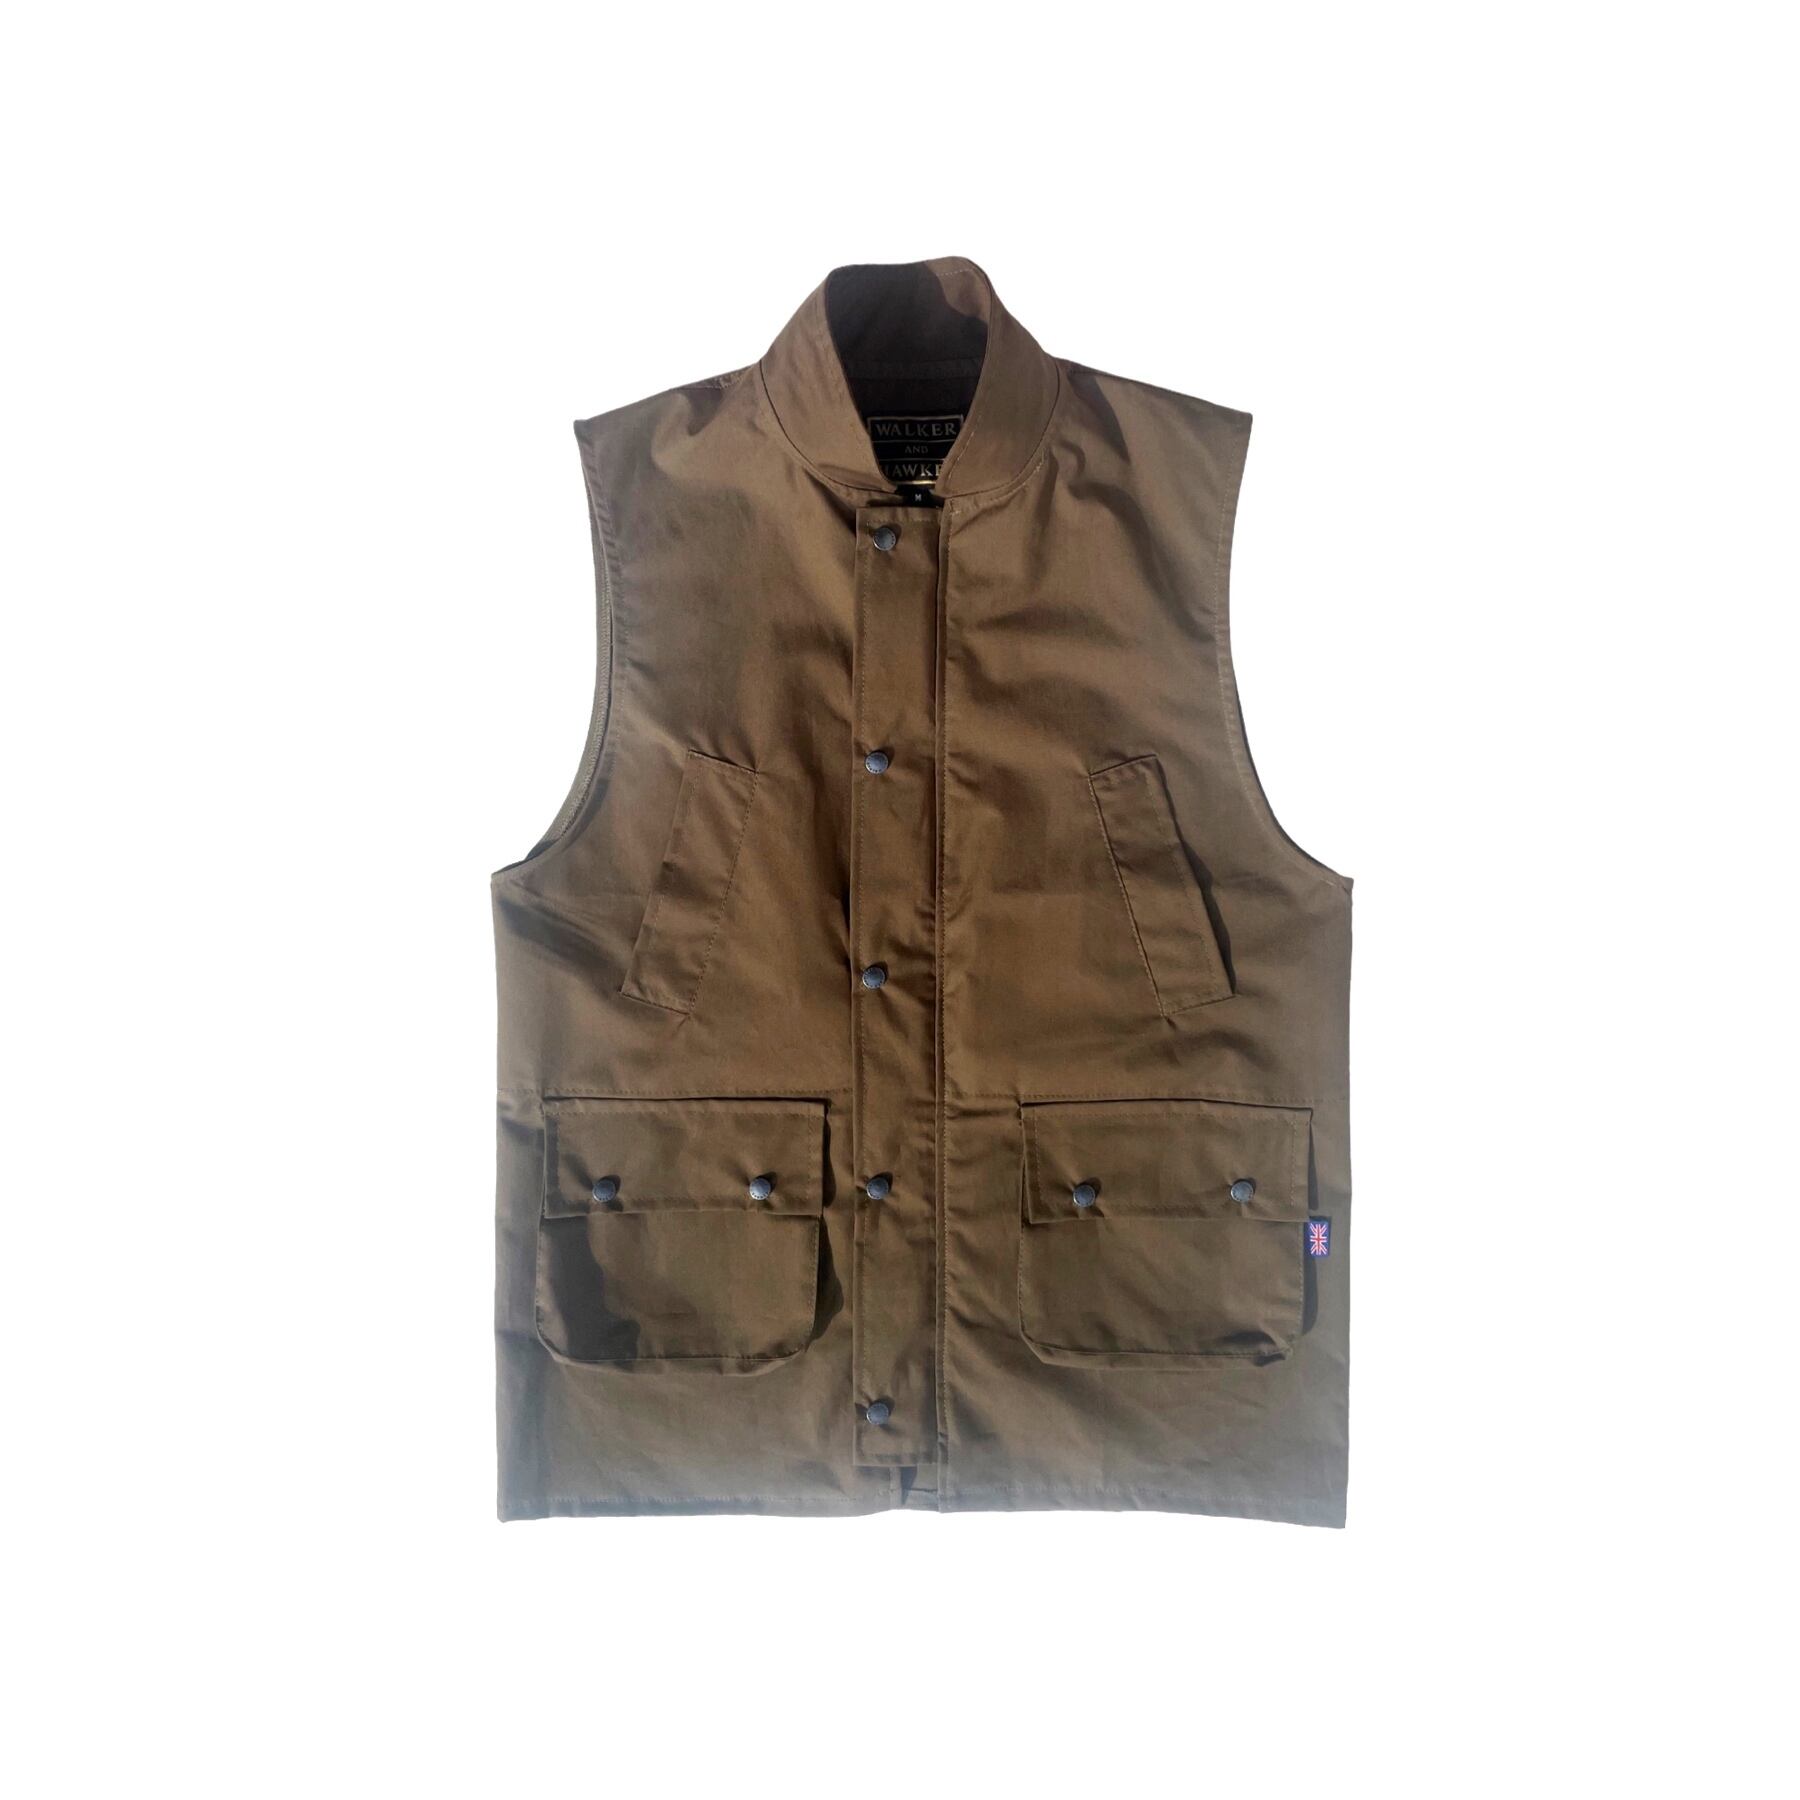 WALKER AND HAWKES(COUNTRY VEST) | BANAL Comfort Store powered by BASE